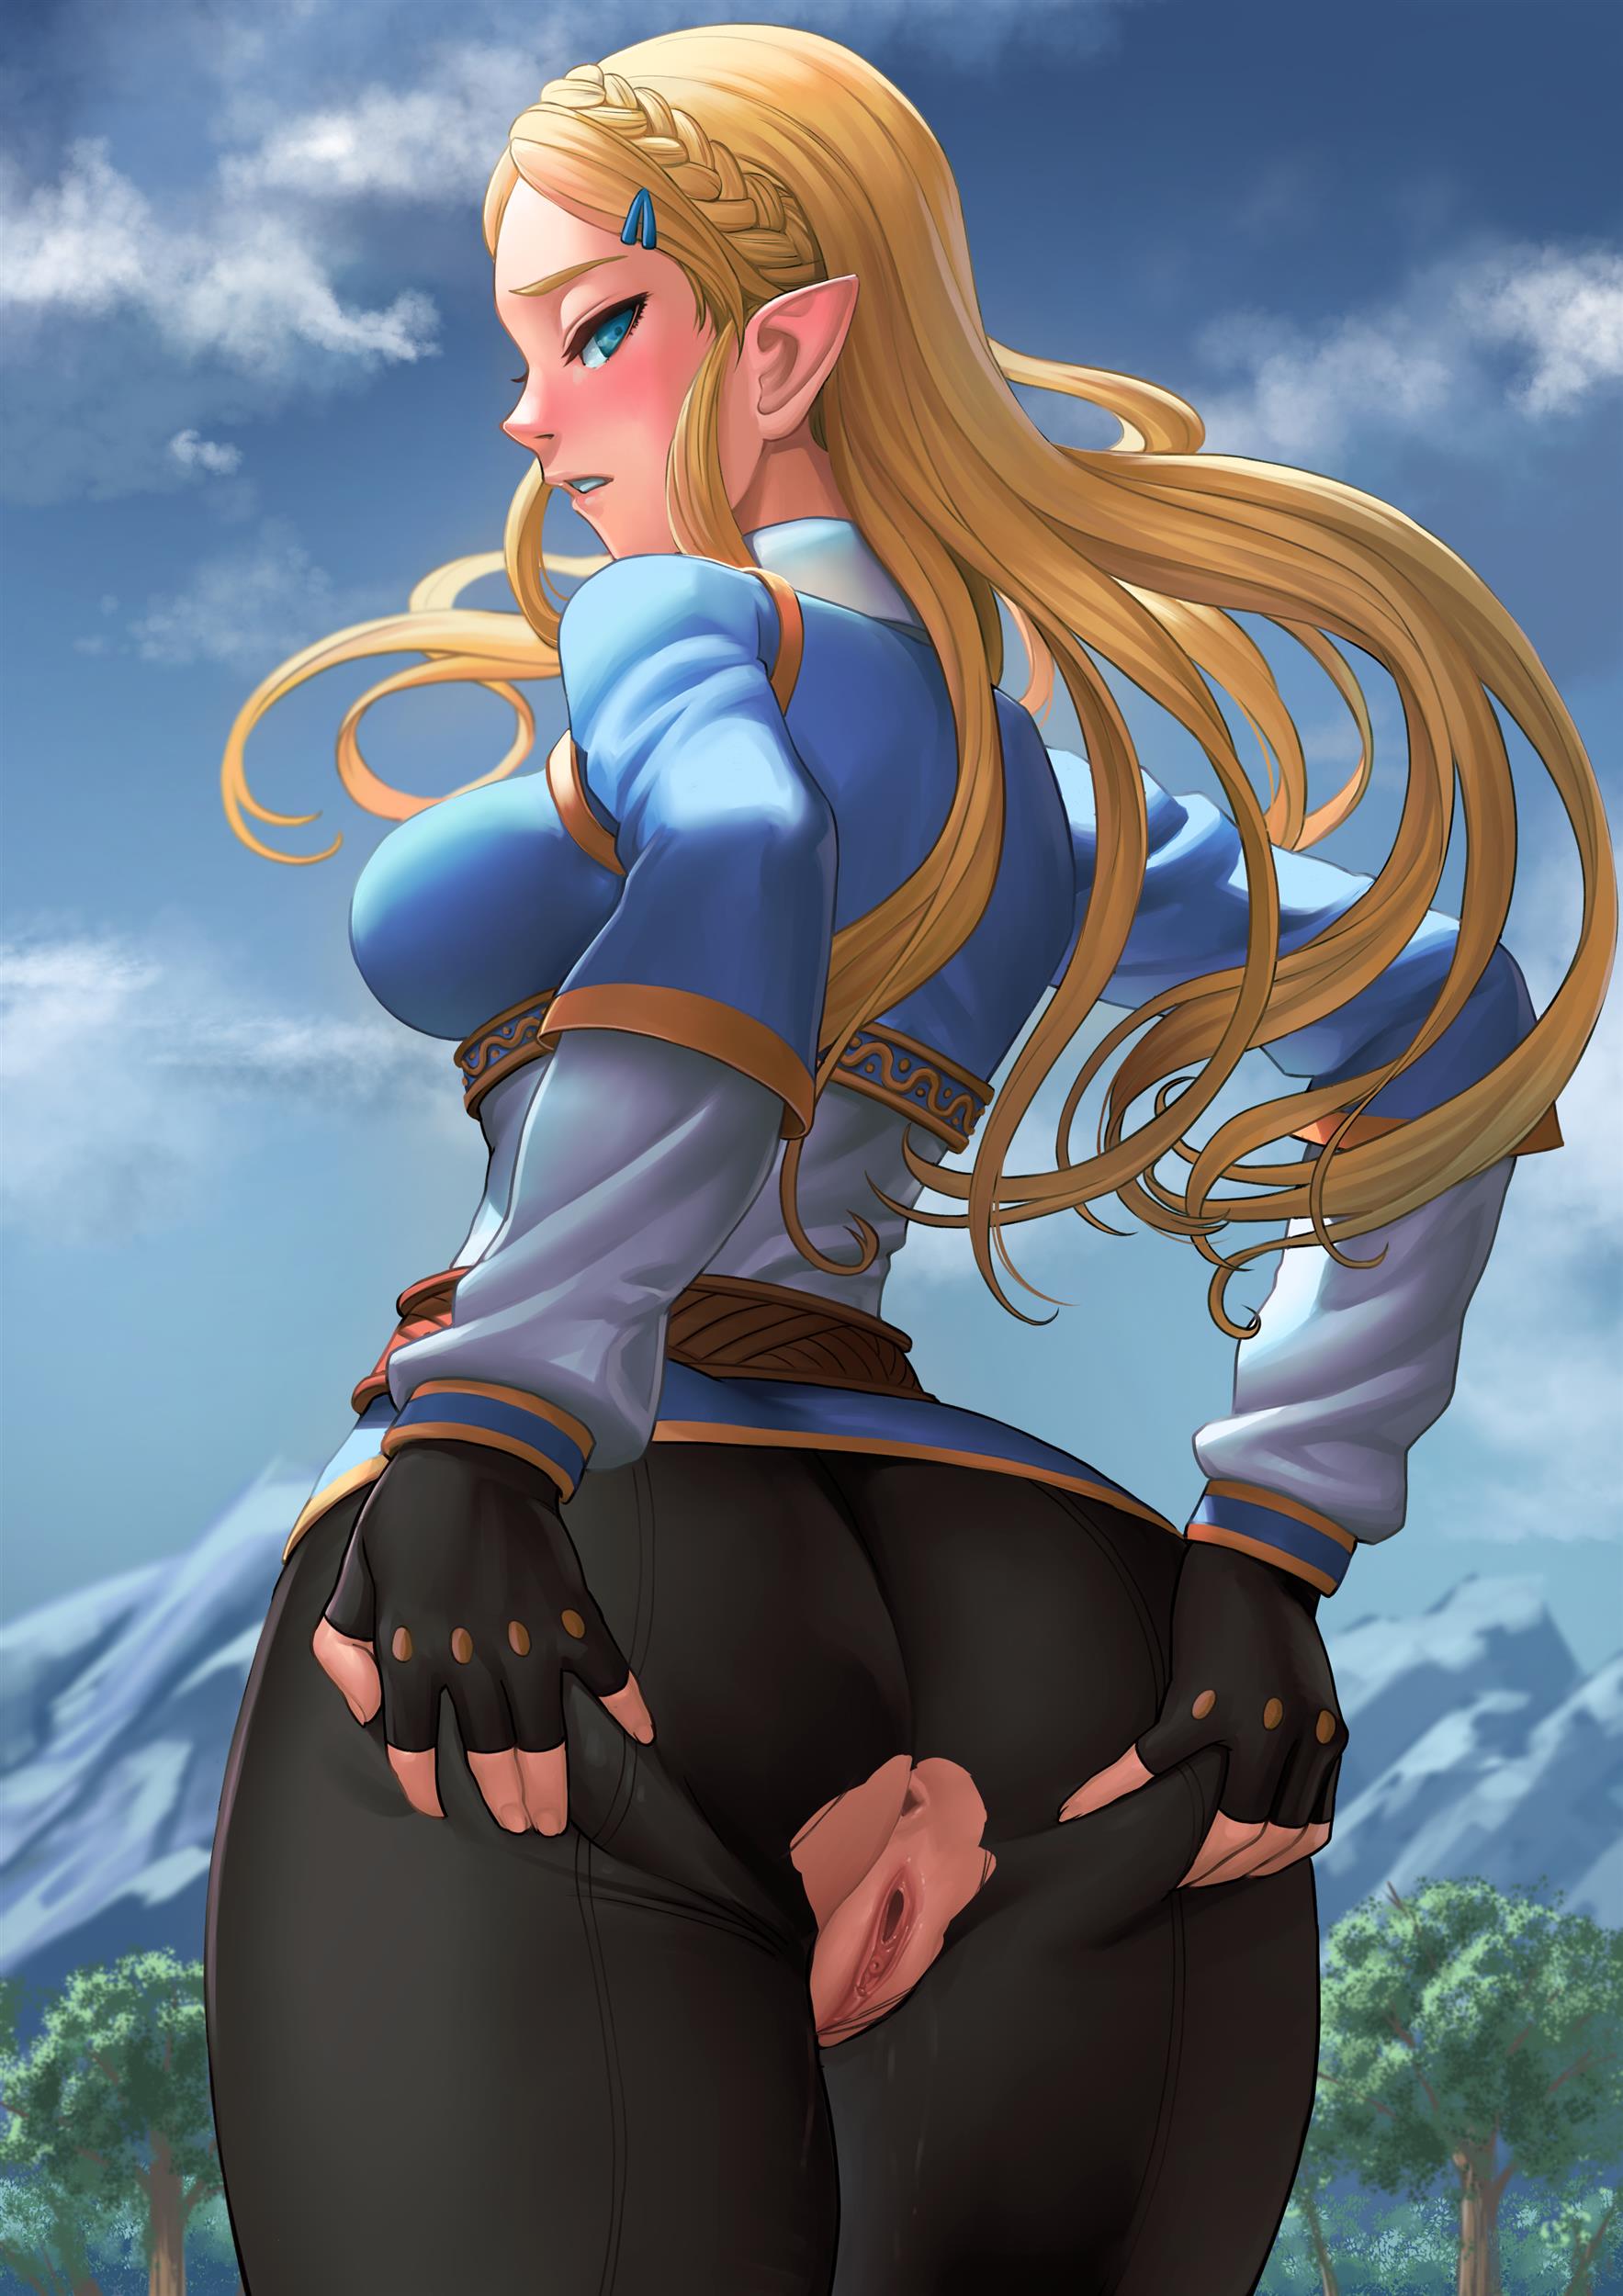 Zelda has a hole in her pants exposing her pussy